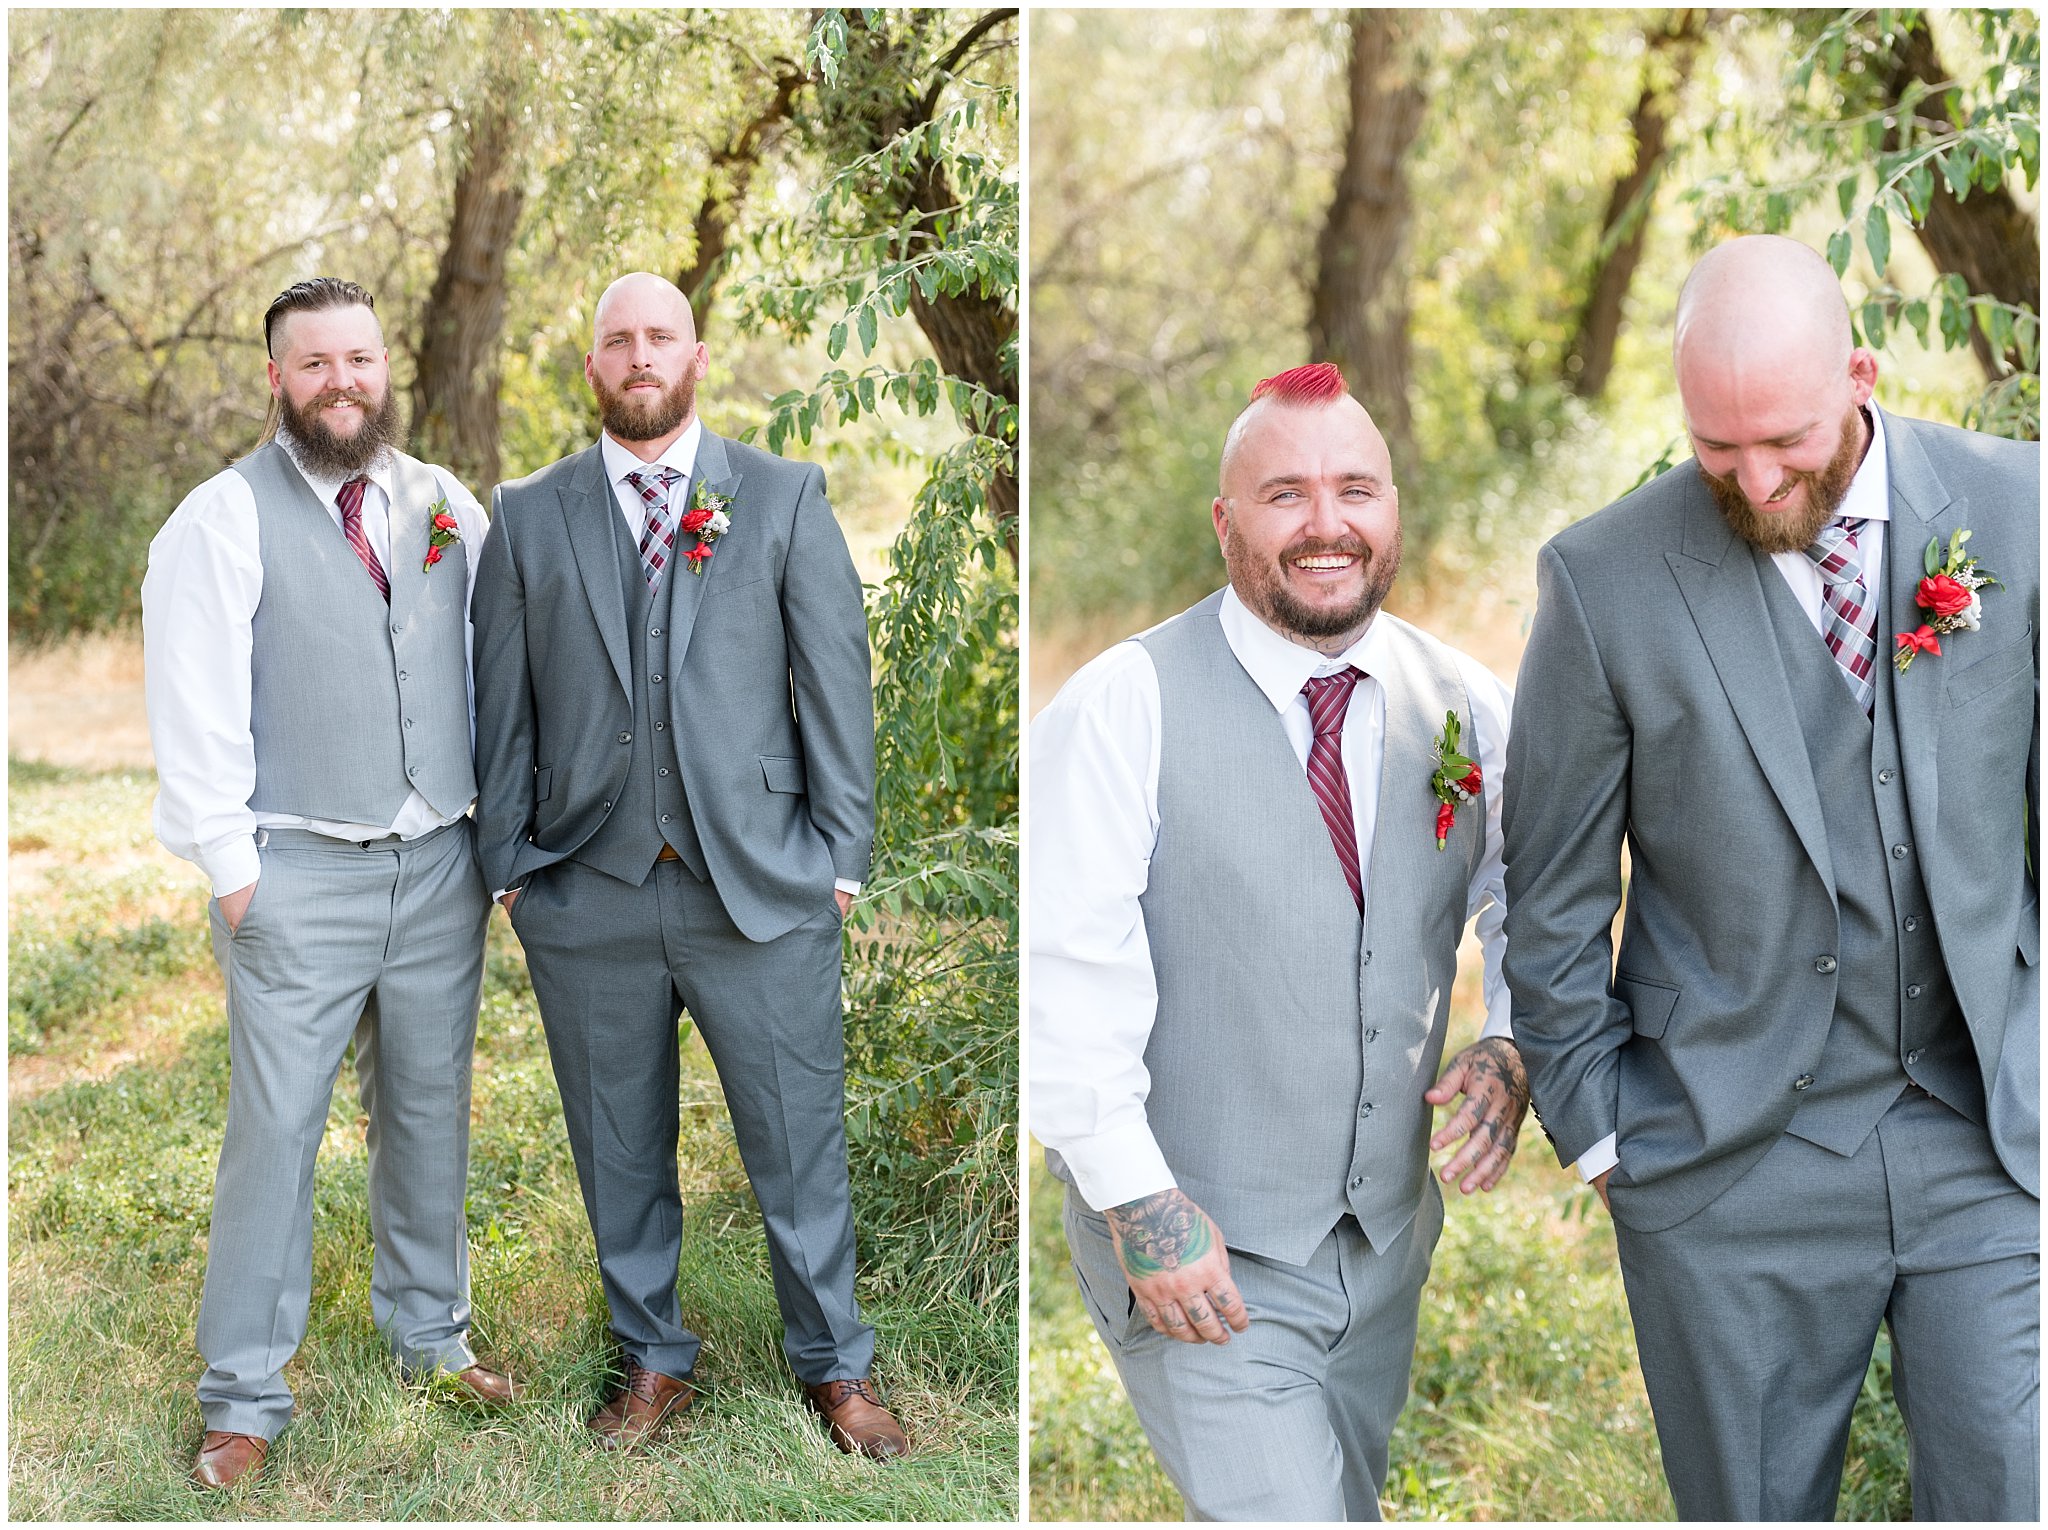 Groom and groomsmen individually laughing | Davis County Outdoor Wedding | Jessie and Dallin Photography